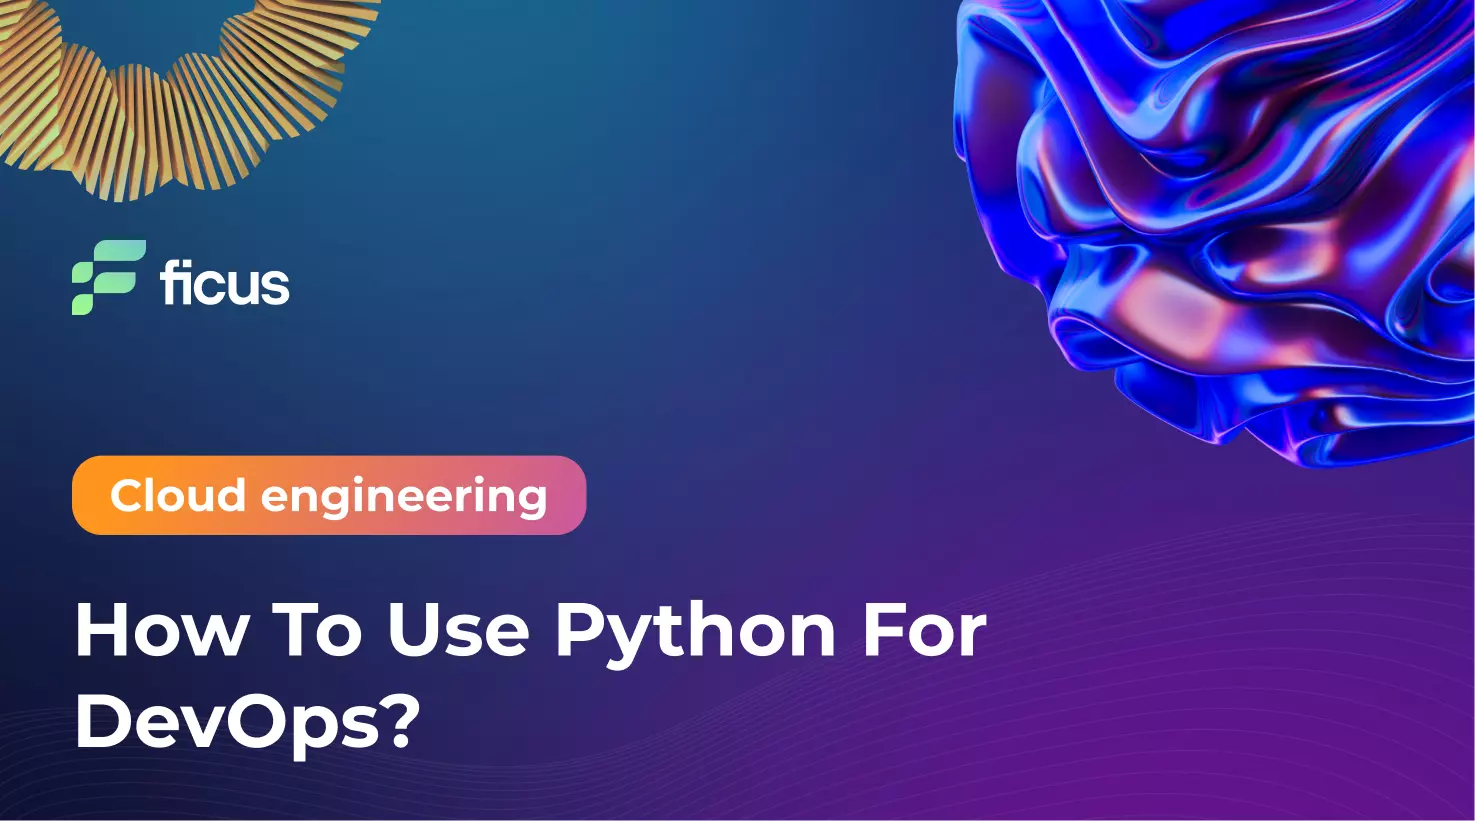 7_How To Use Python For DevOps_